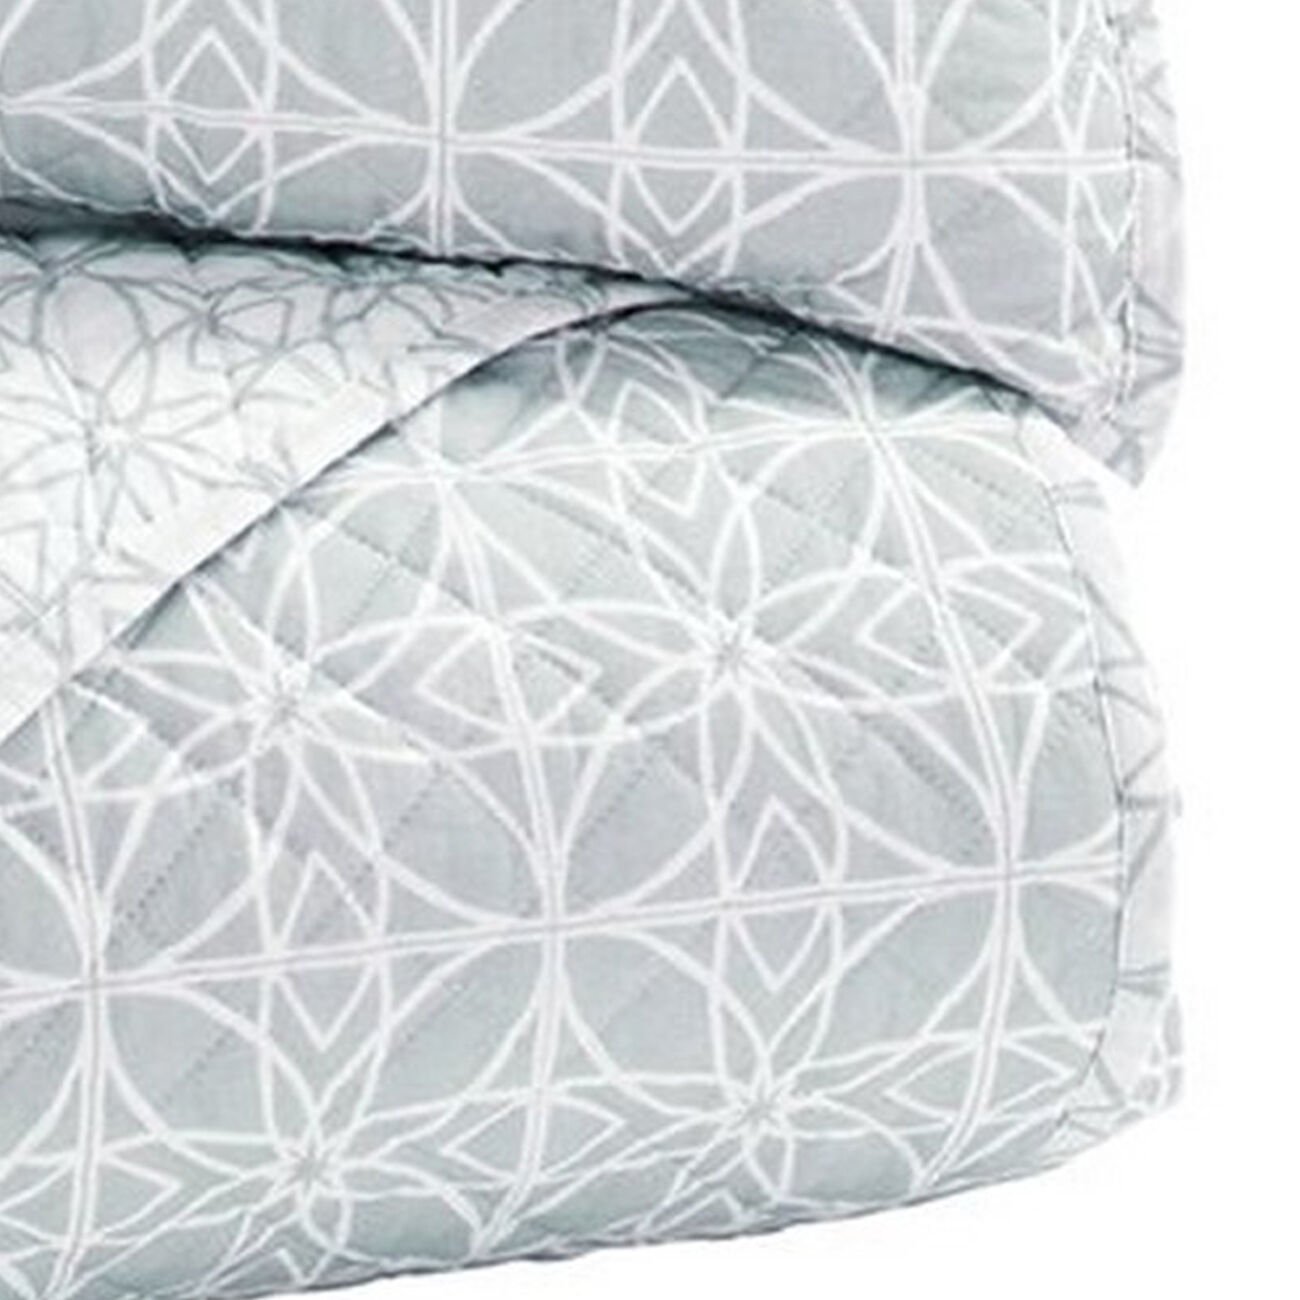 Fabric King Size Quilt Set with Geometric Design, Gray and White